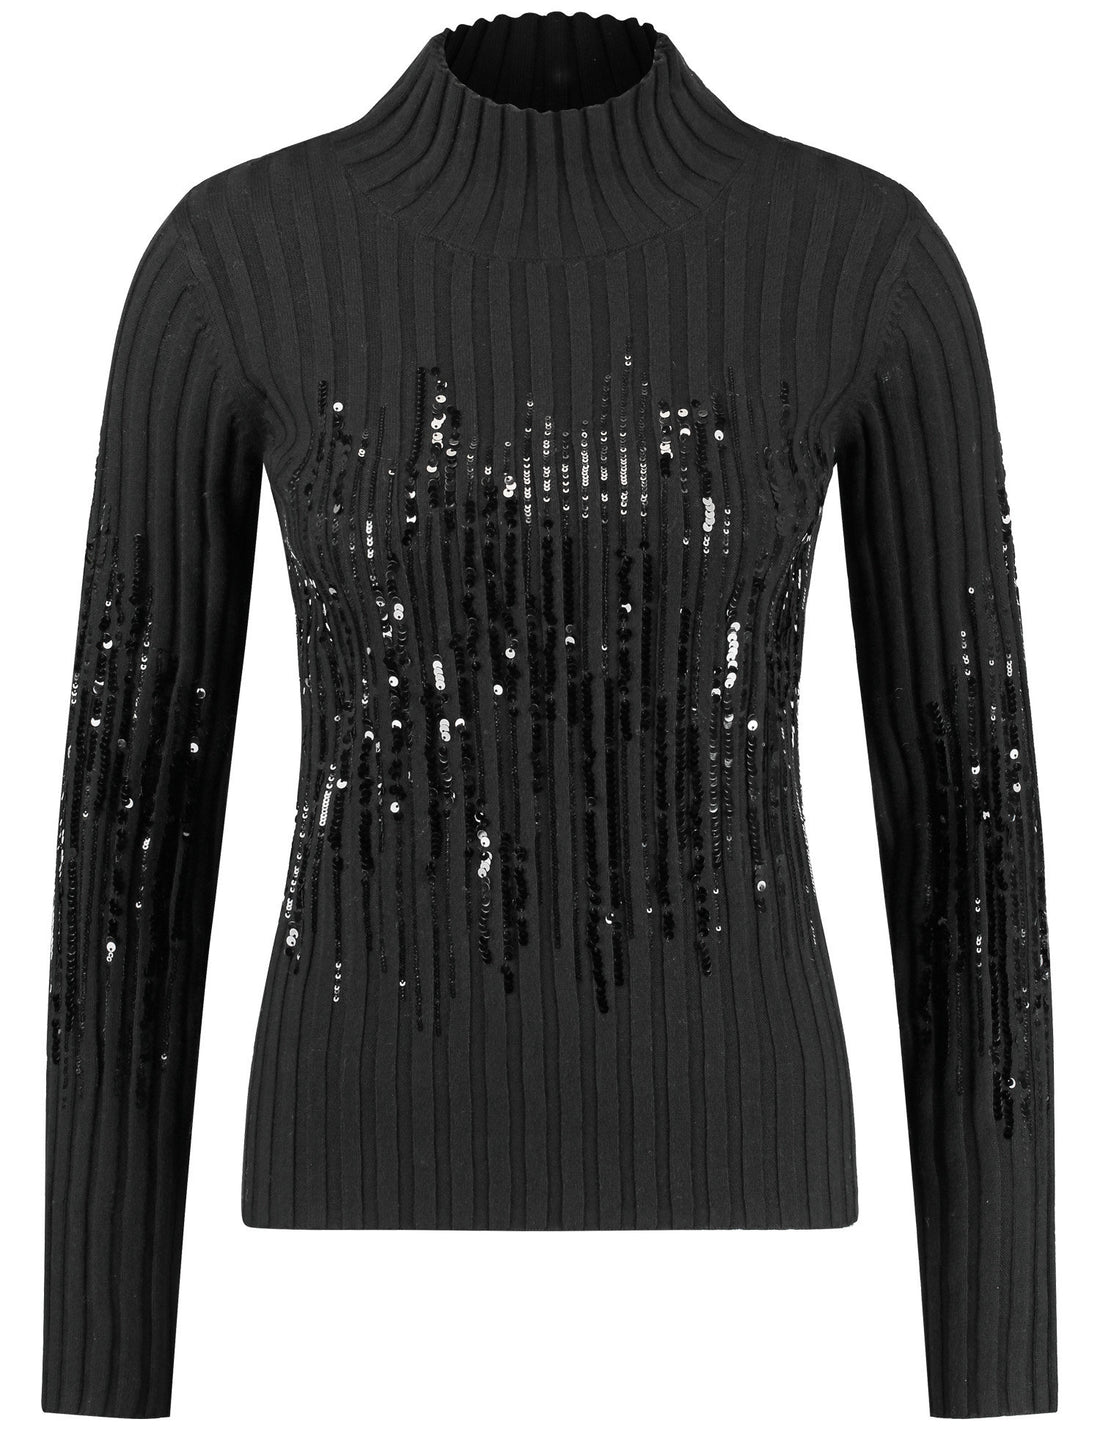 Sweater With A Percentage Of Silk And Sequin Trim_170566-44740_11000_01